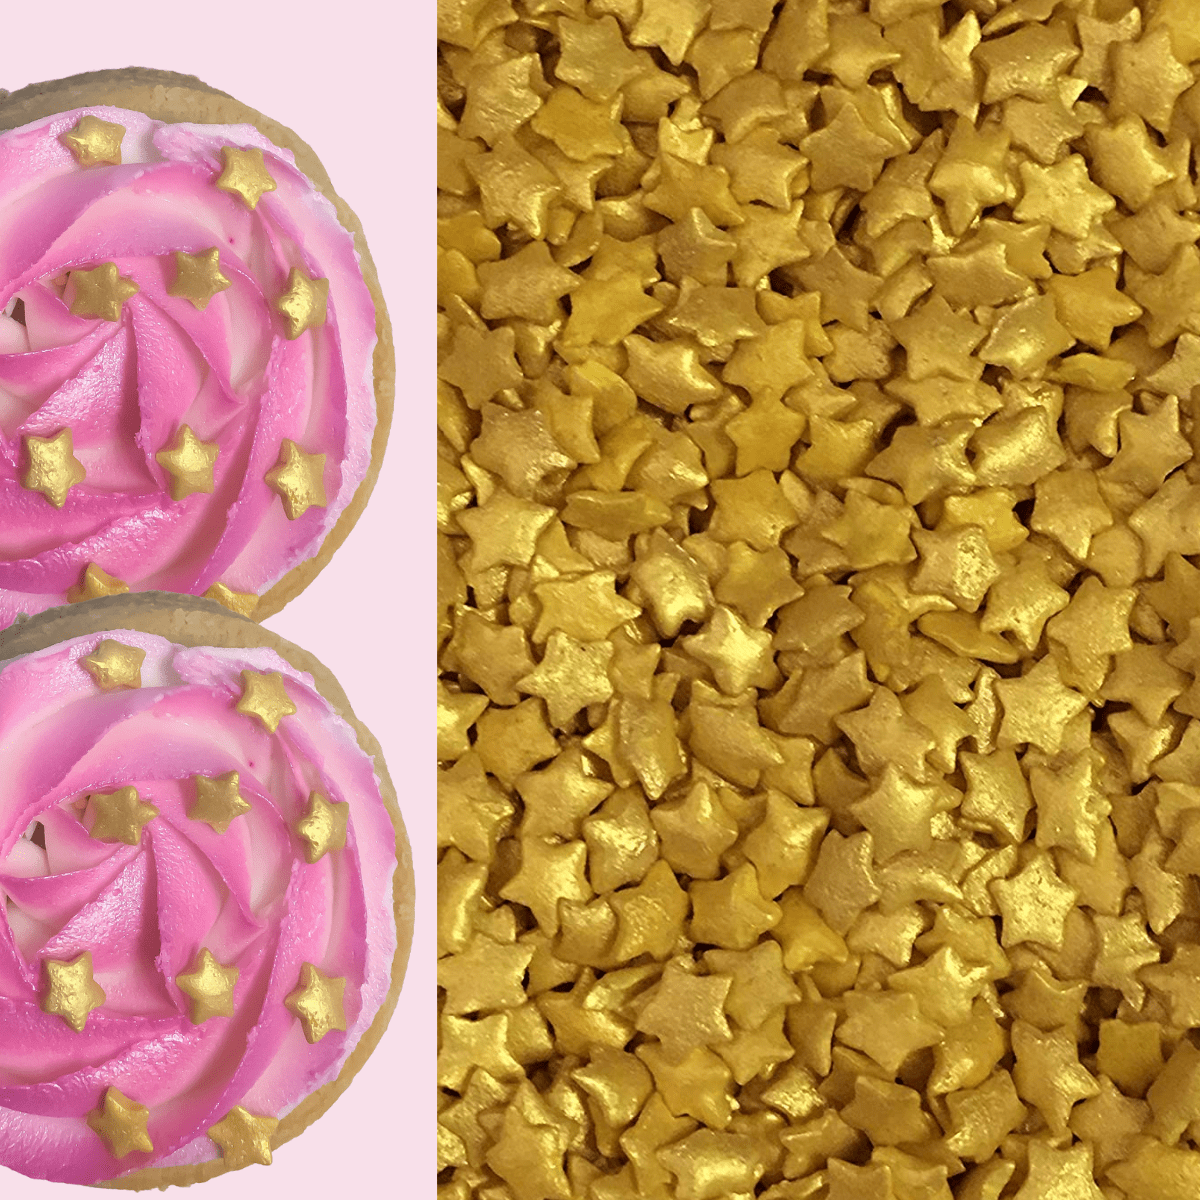 1g(2000pcs) Edible Glitter Gold Stars Sprinkles,pretty Shinny Glitter,ideal  Use For Cake Icing Sprinkles Decoration - Cake Tools - AliExpress